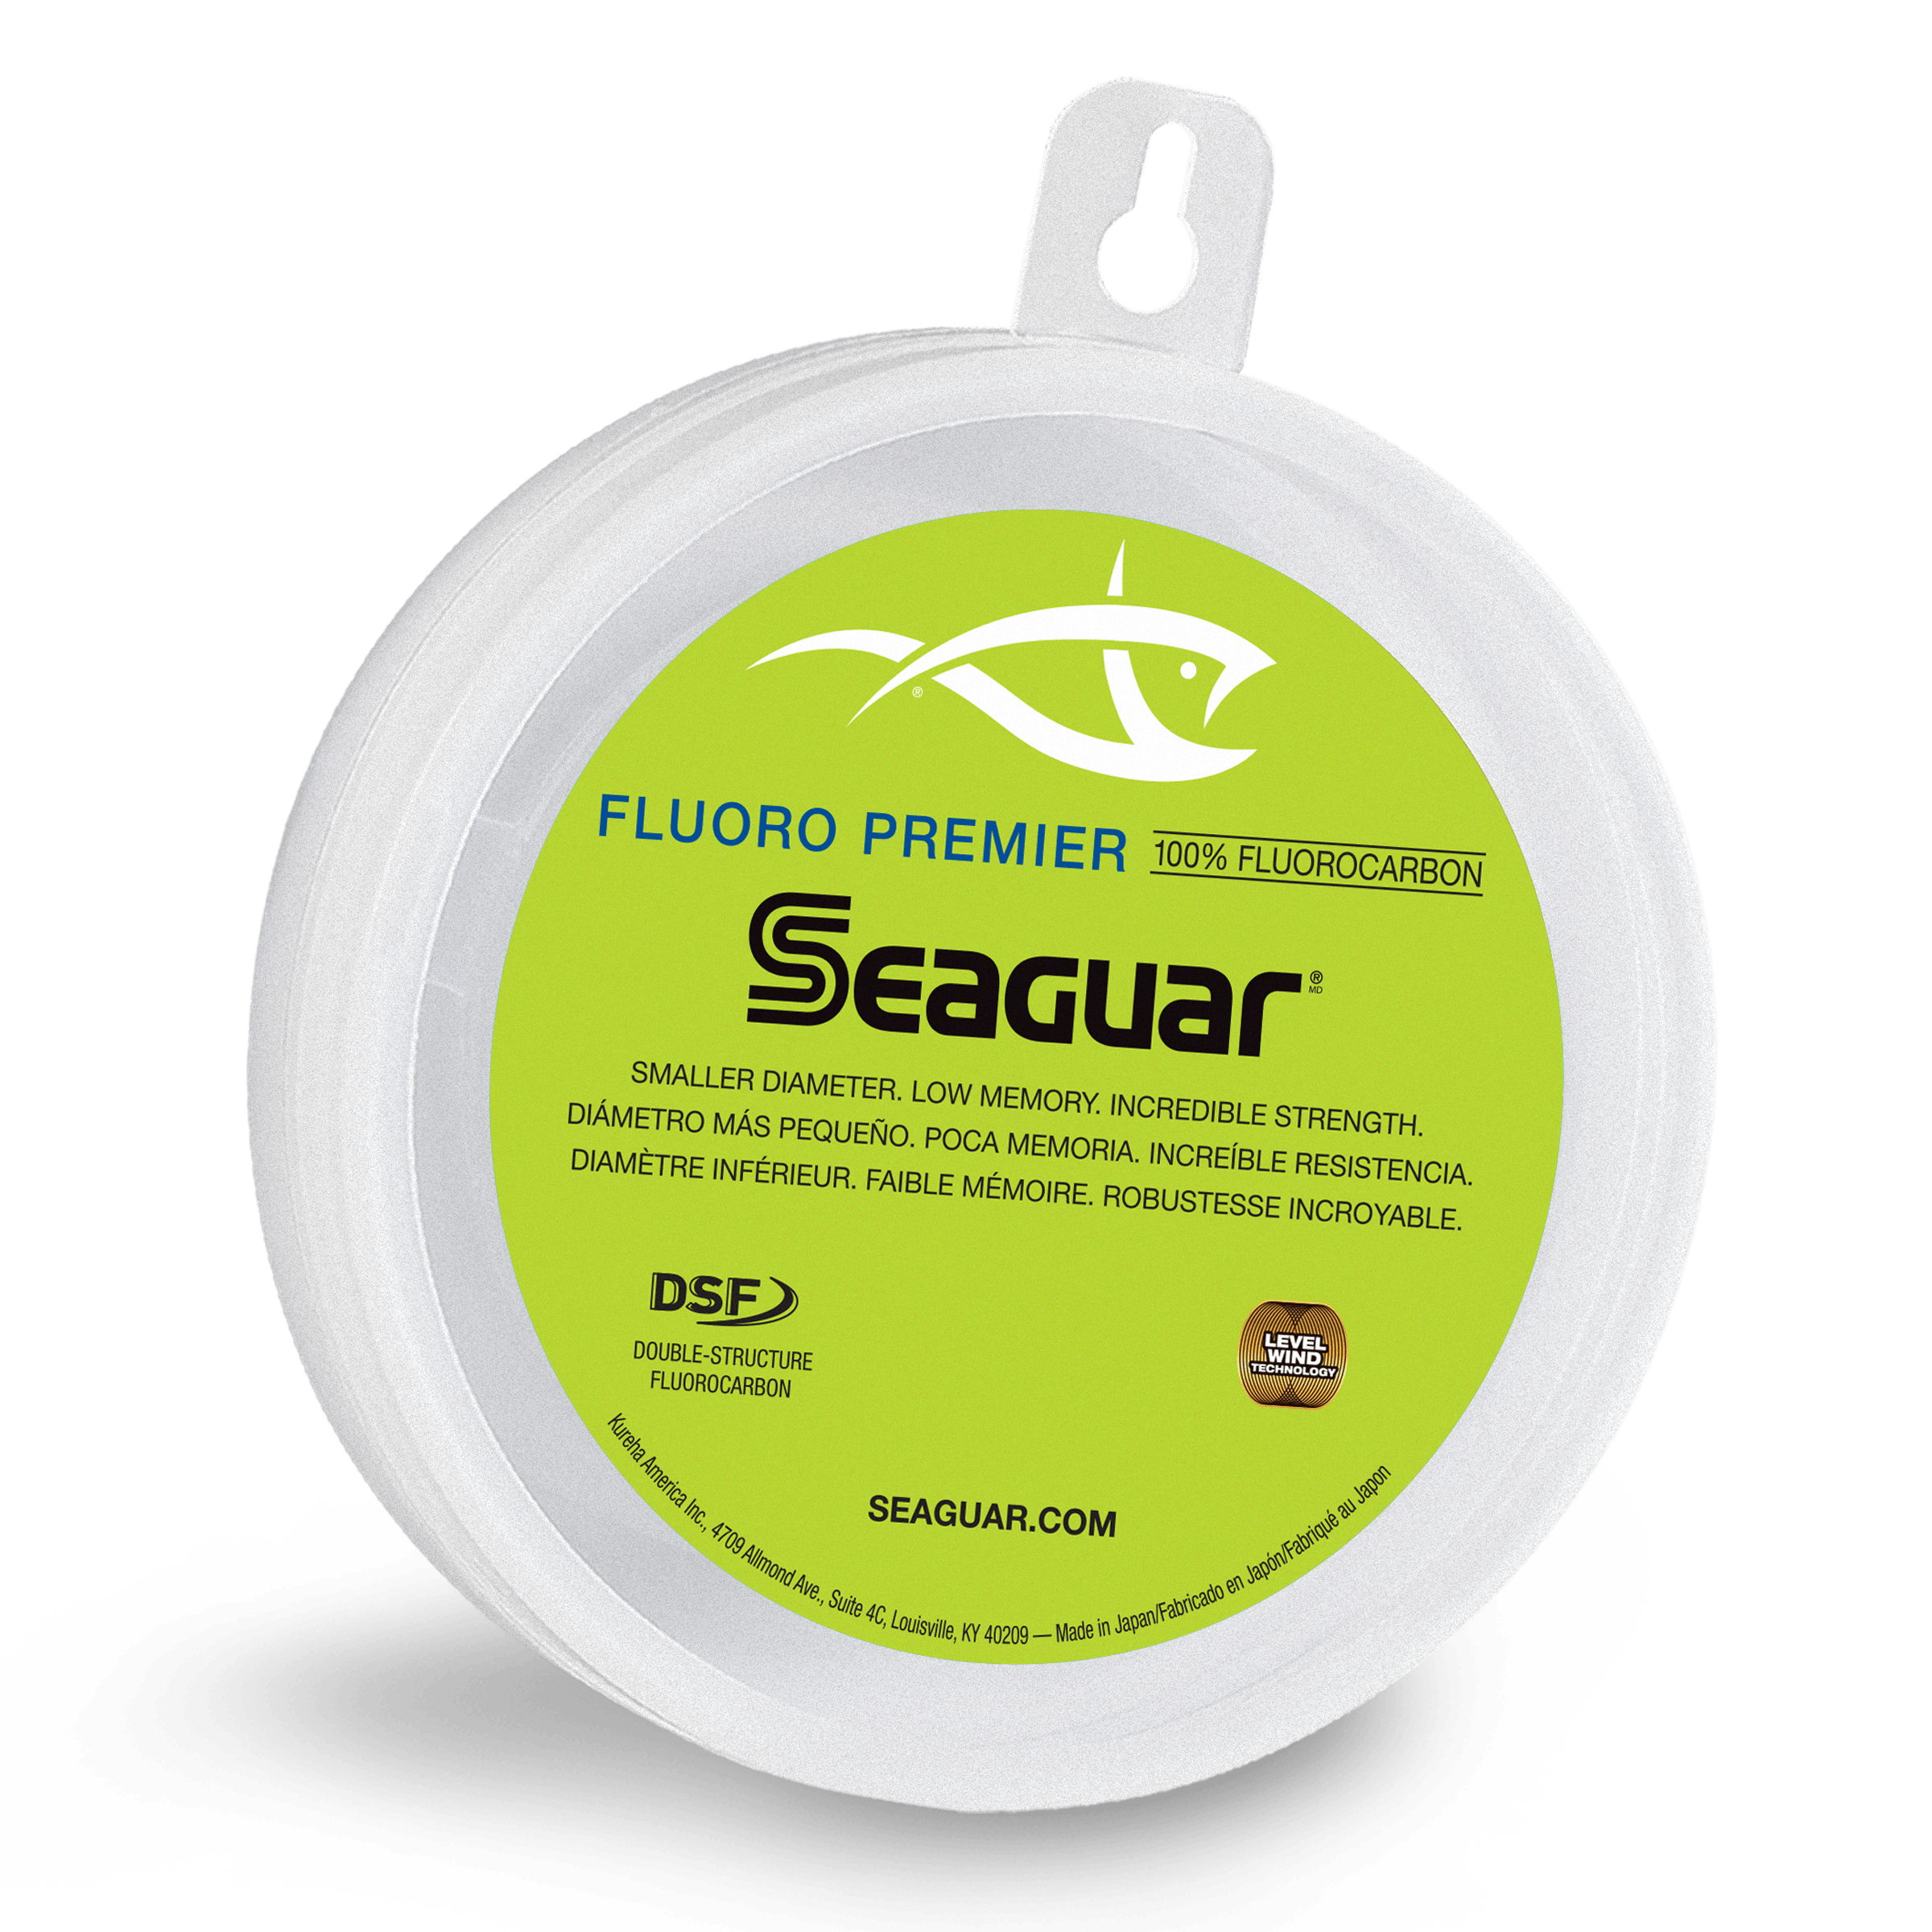 Seaguar, Gold Label Saltwater Fluorocarbon Line, 25 Yards, 25 lbs Tested,  015 Diameter, Gold